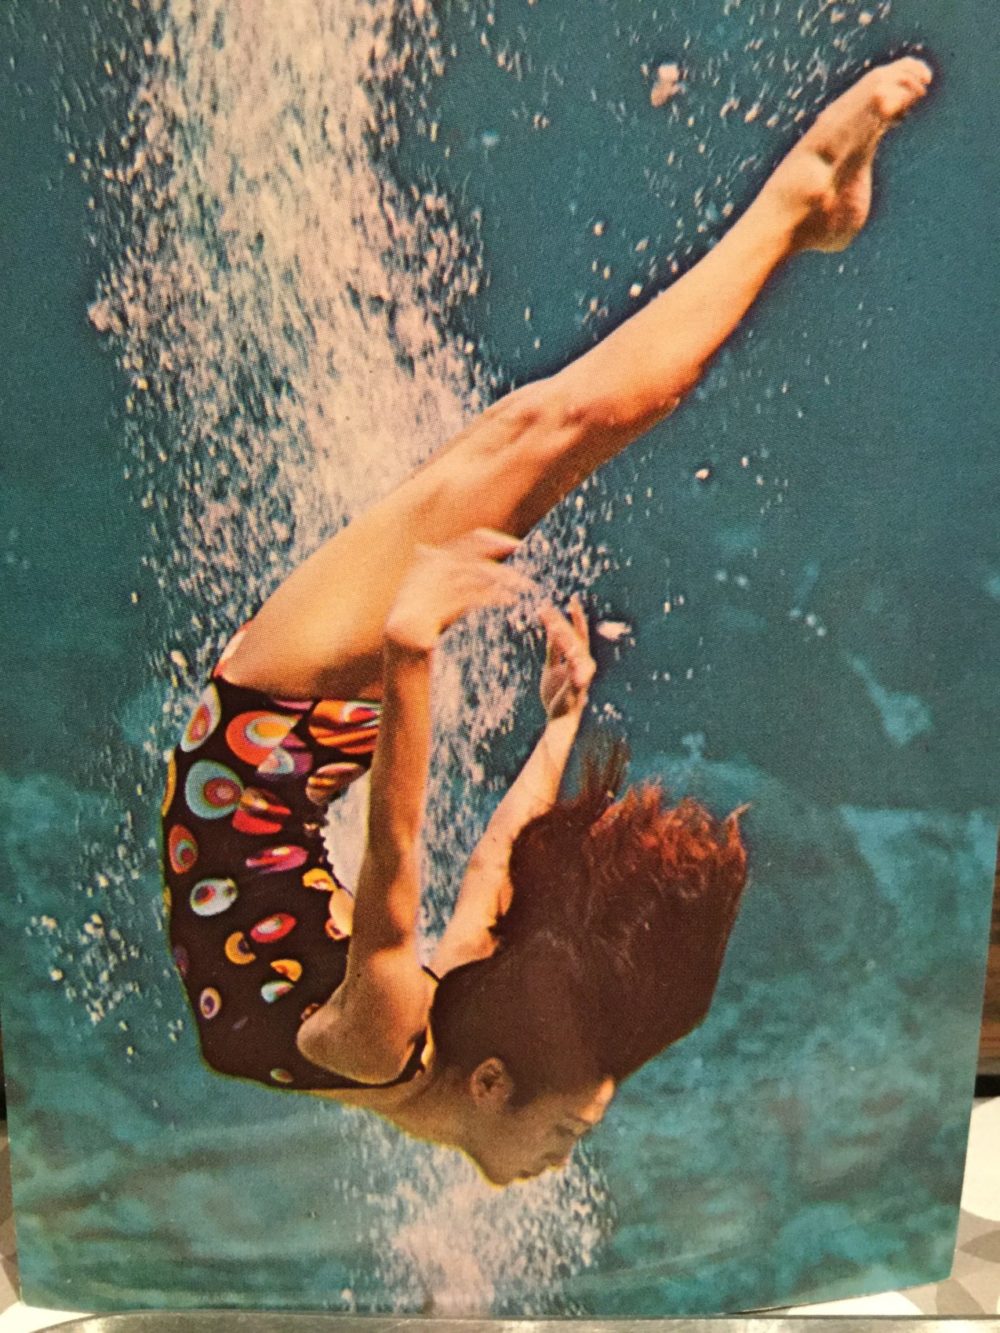 The author's mother, Shinko Wheeler, during her time as a Weeki Wachee mermaid in 1972. (Courtesy)